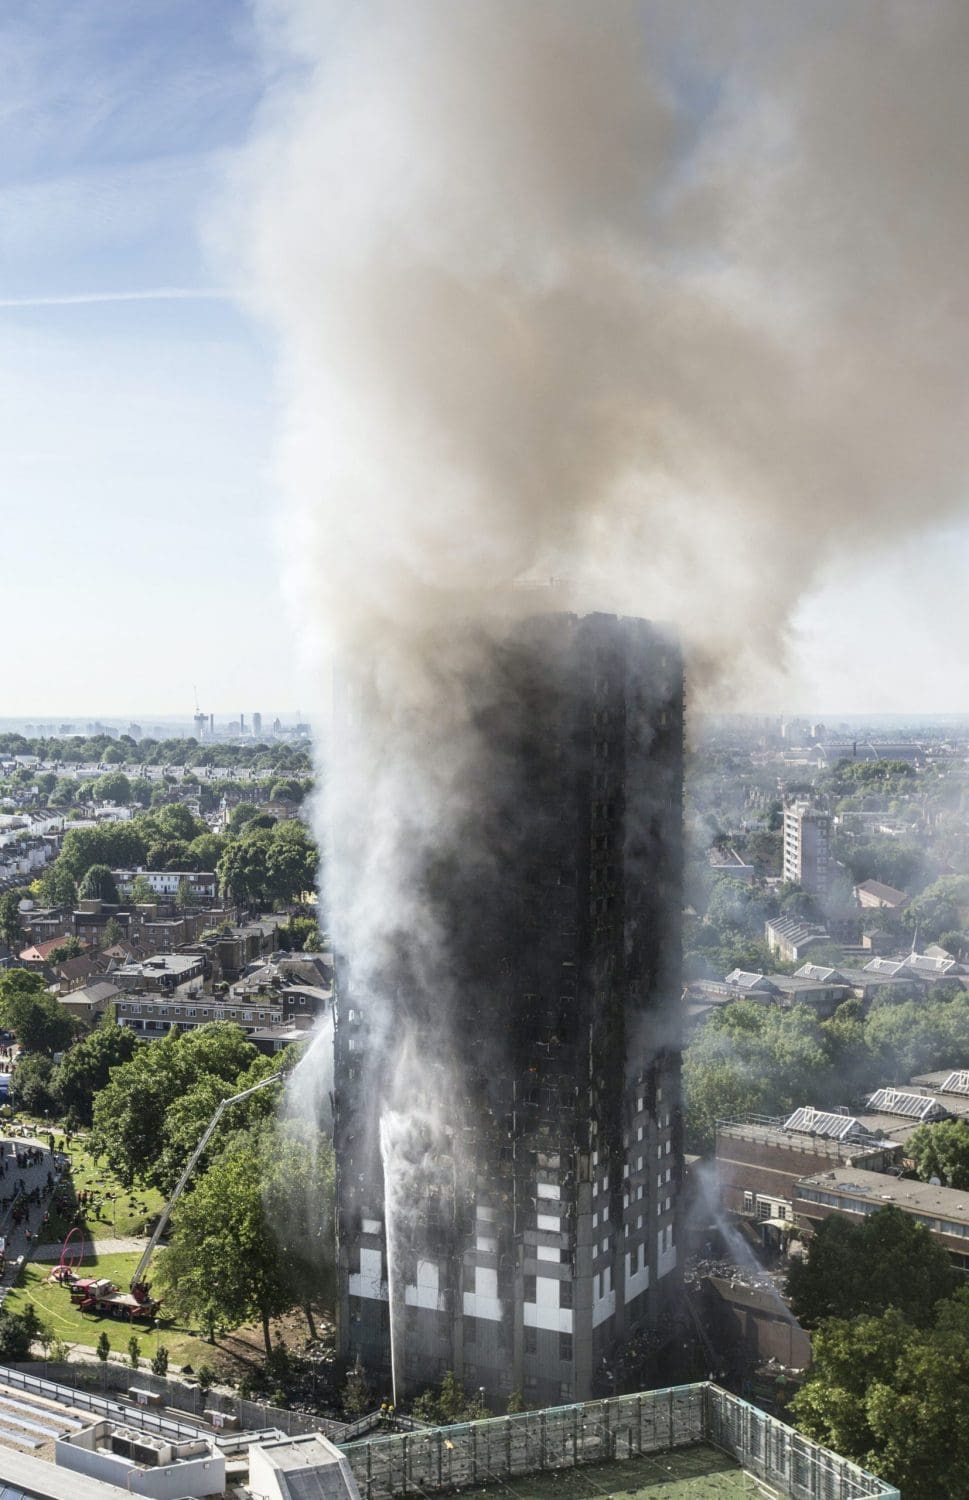 The Grenfell fire